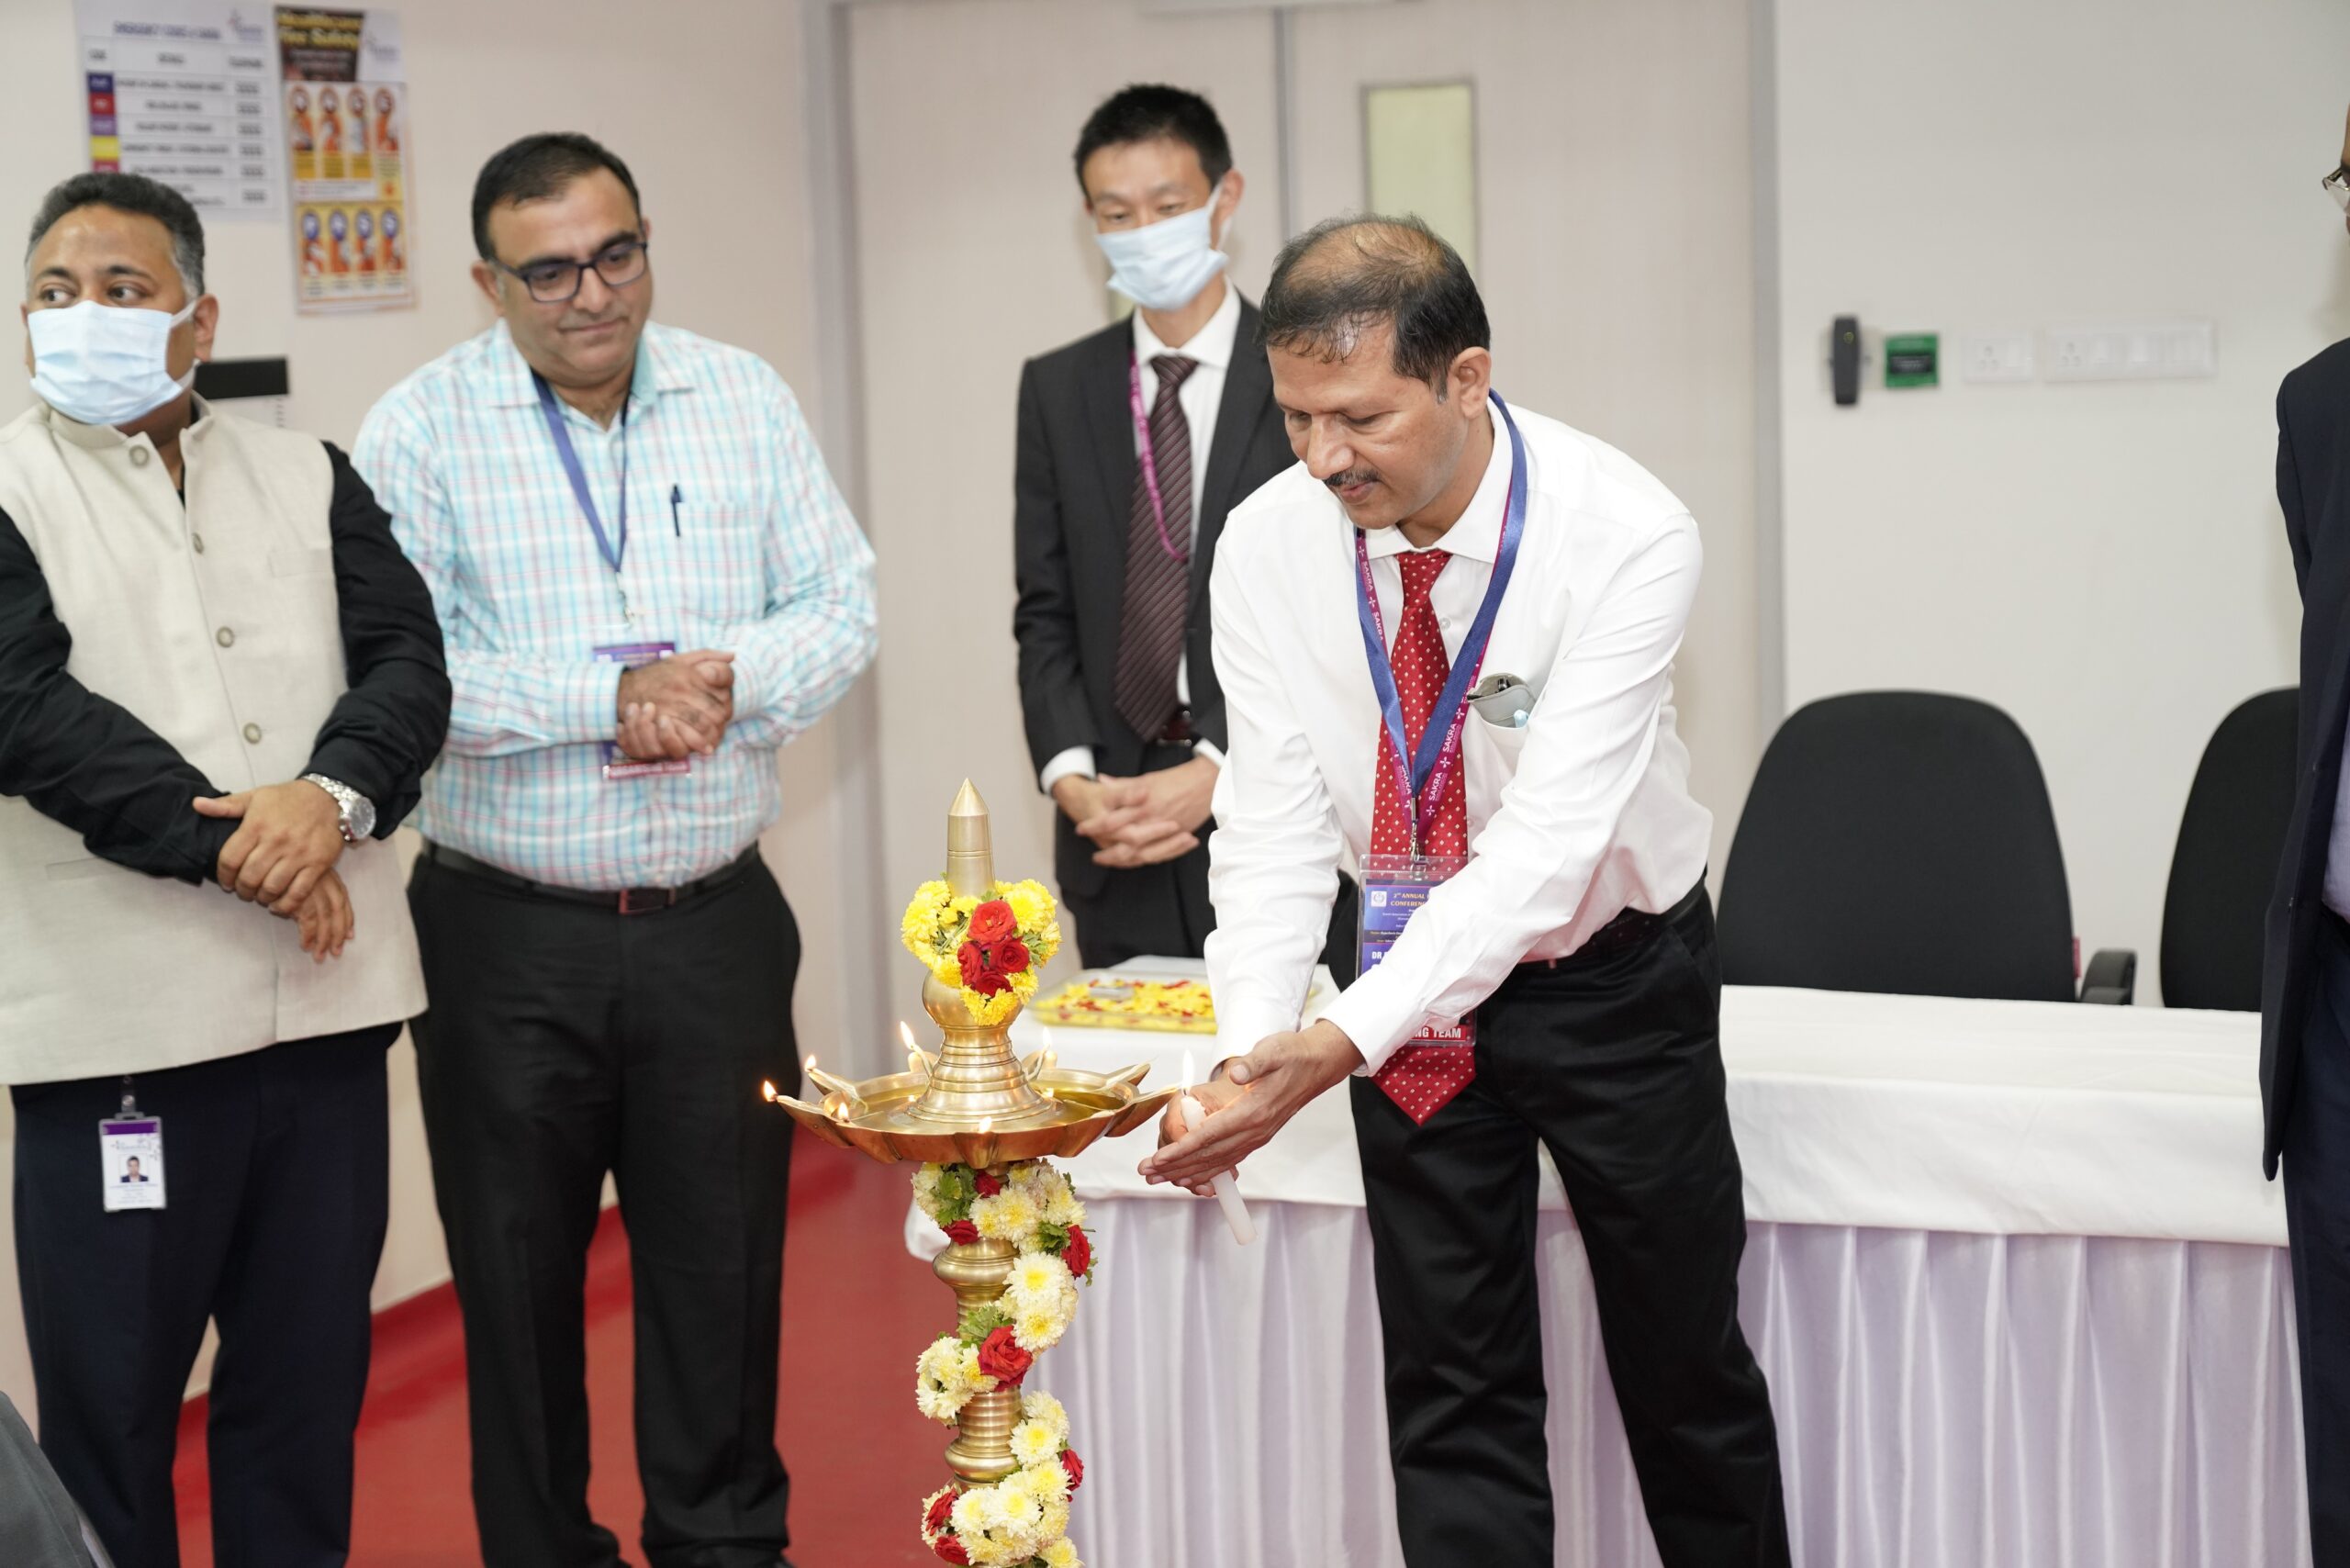 Sakra World Hospital Conducts the 2nd Annual Conference for KARM with Focus on Hyperbaric Oxygen Therapy